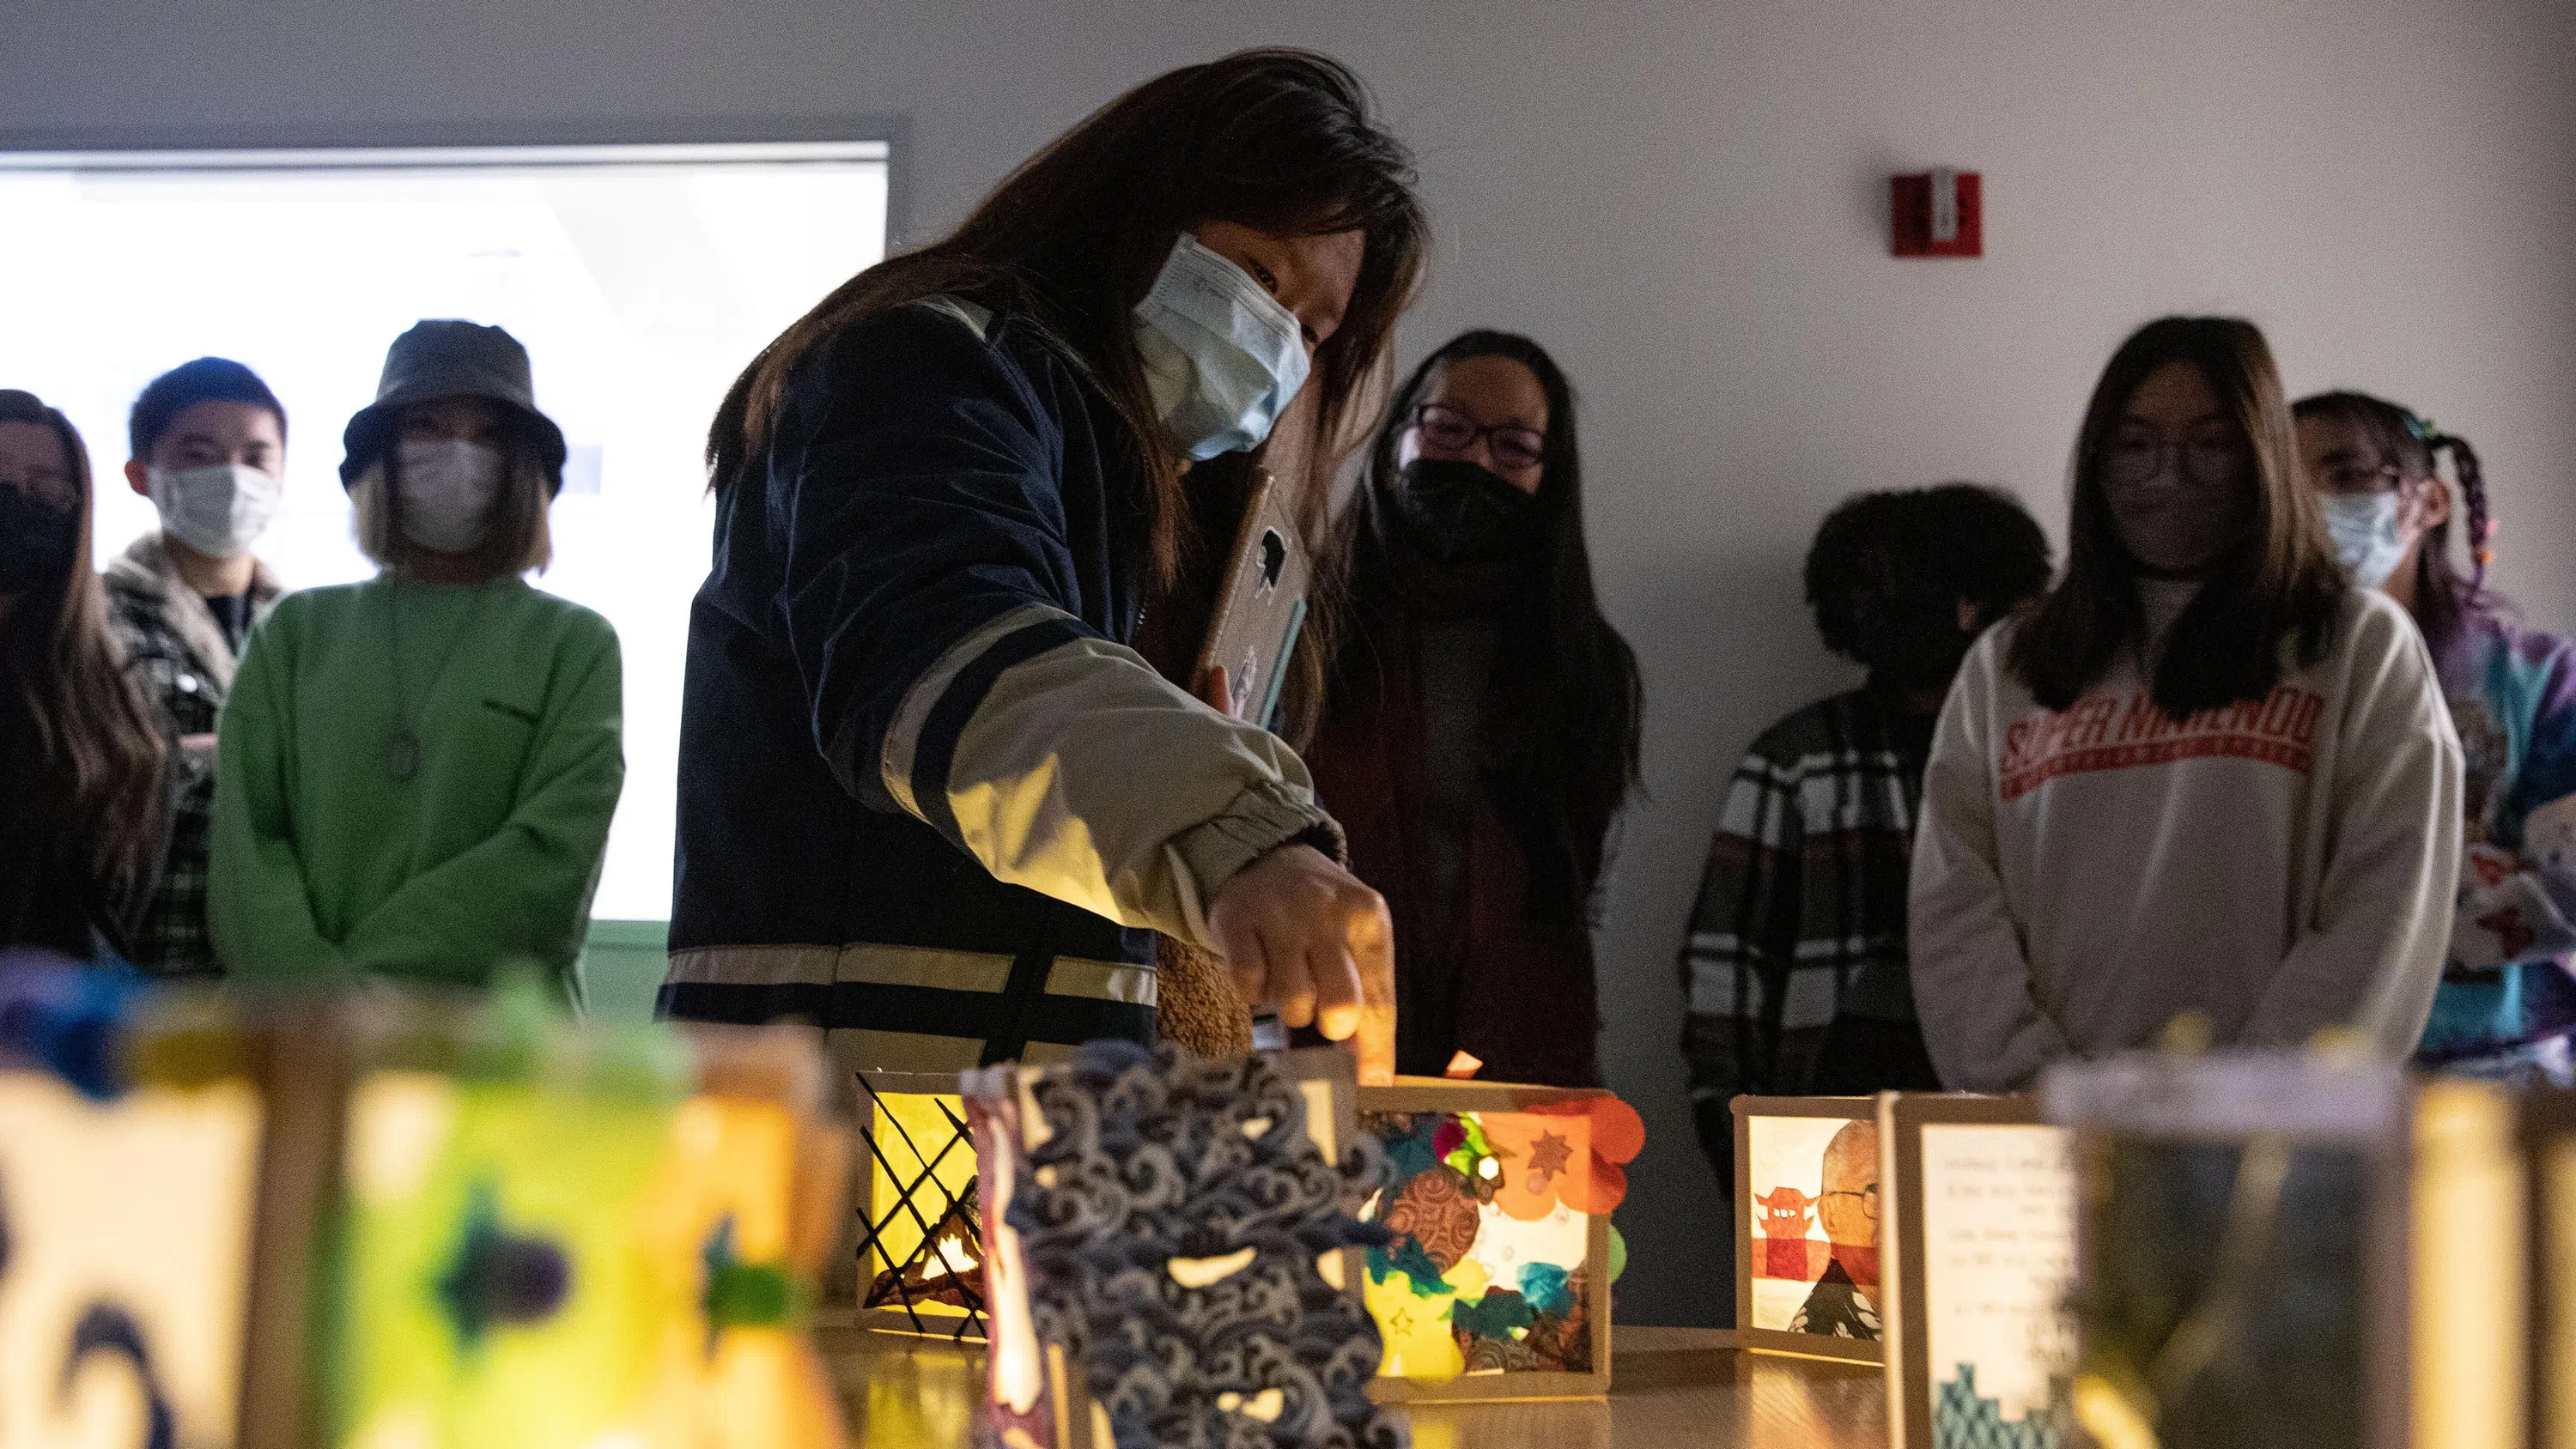 The Critical Studies class closely reviews paper lanterns, which illuminate a dimly-lit space.